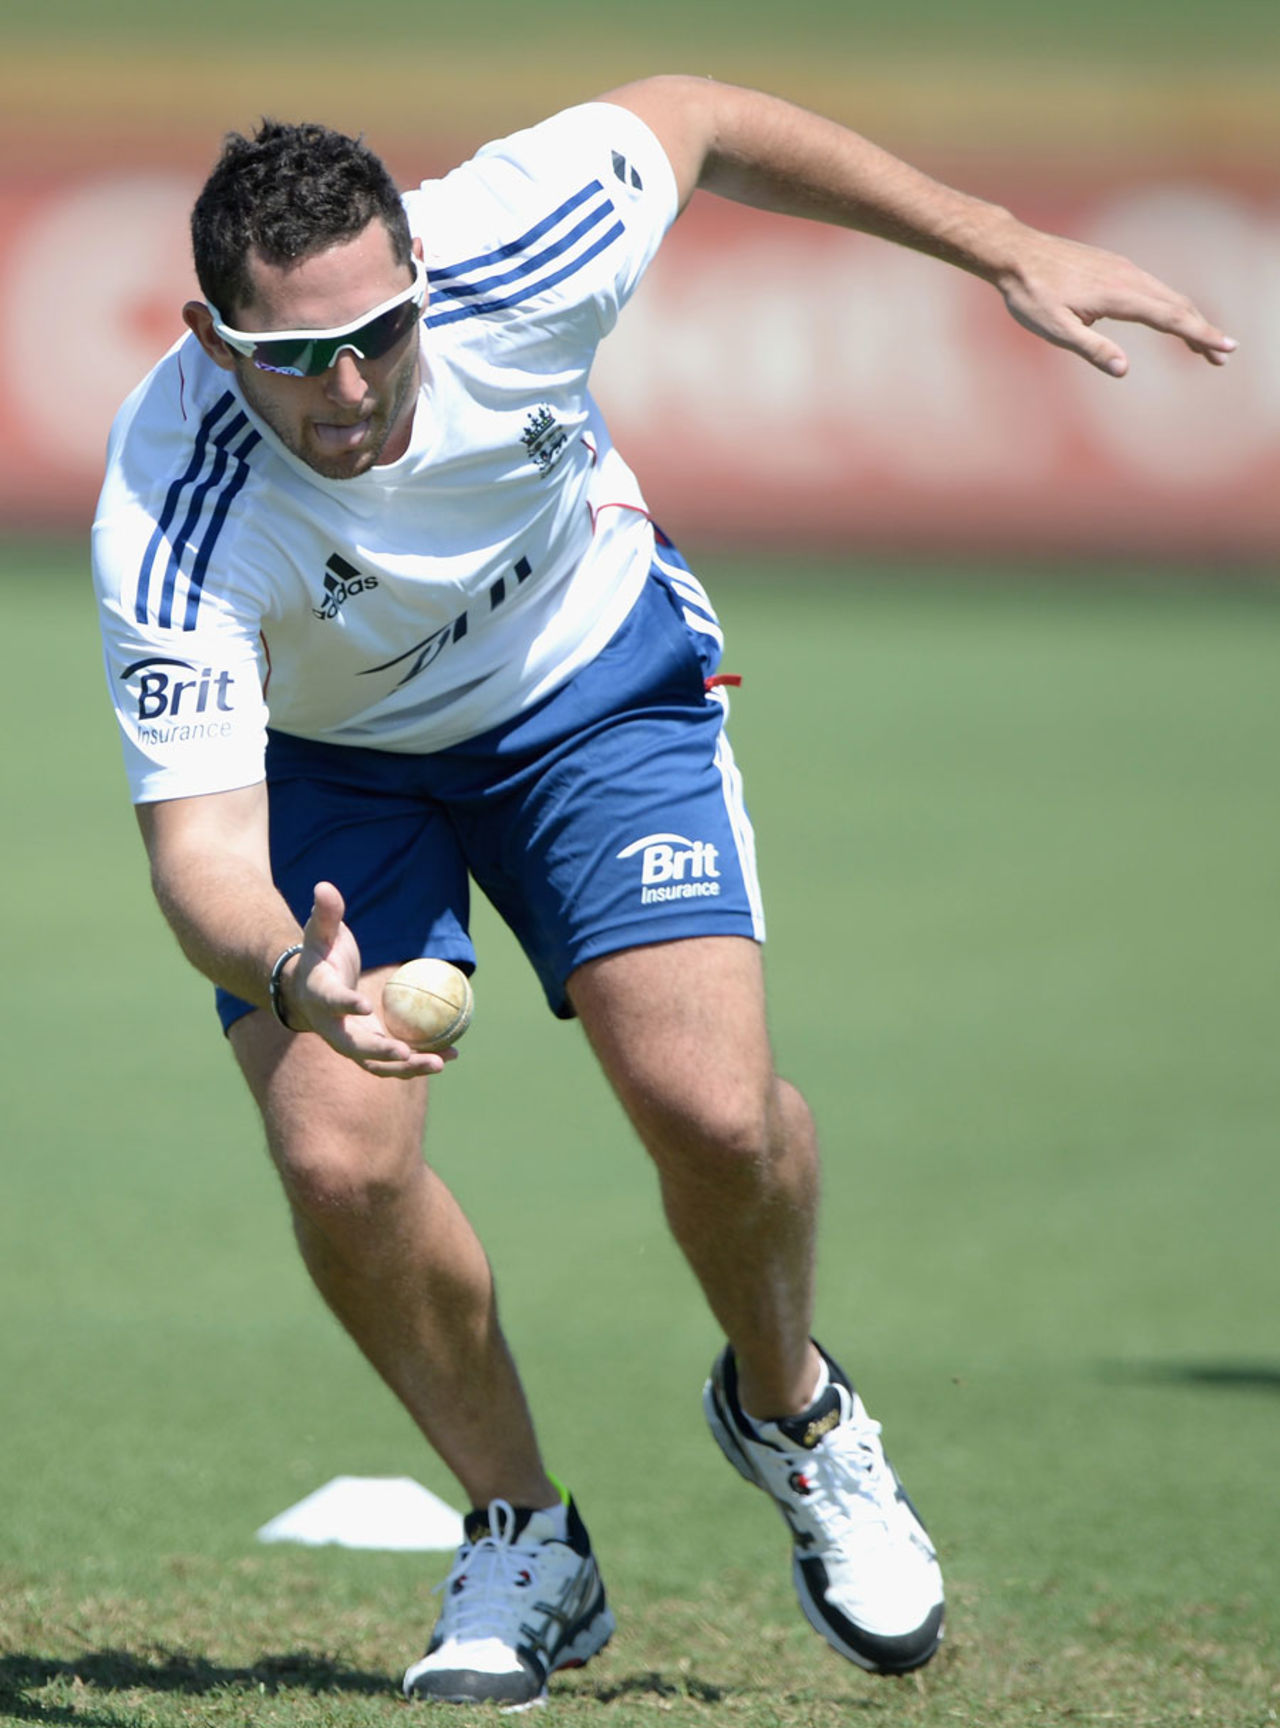 Tim Bresnan takes part in a fielding drill, Perth, October 27, 2013